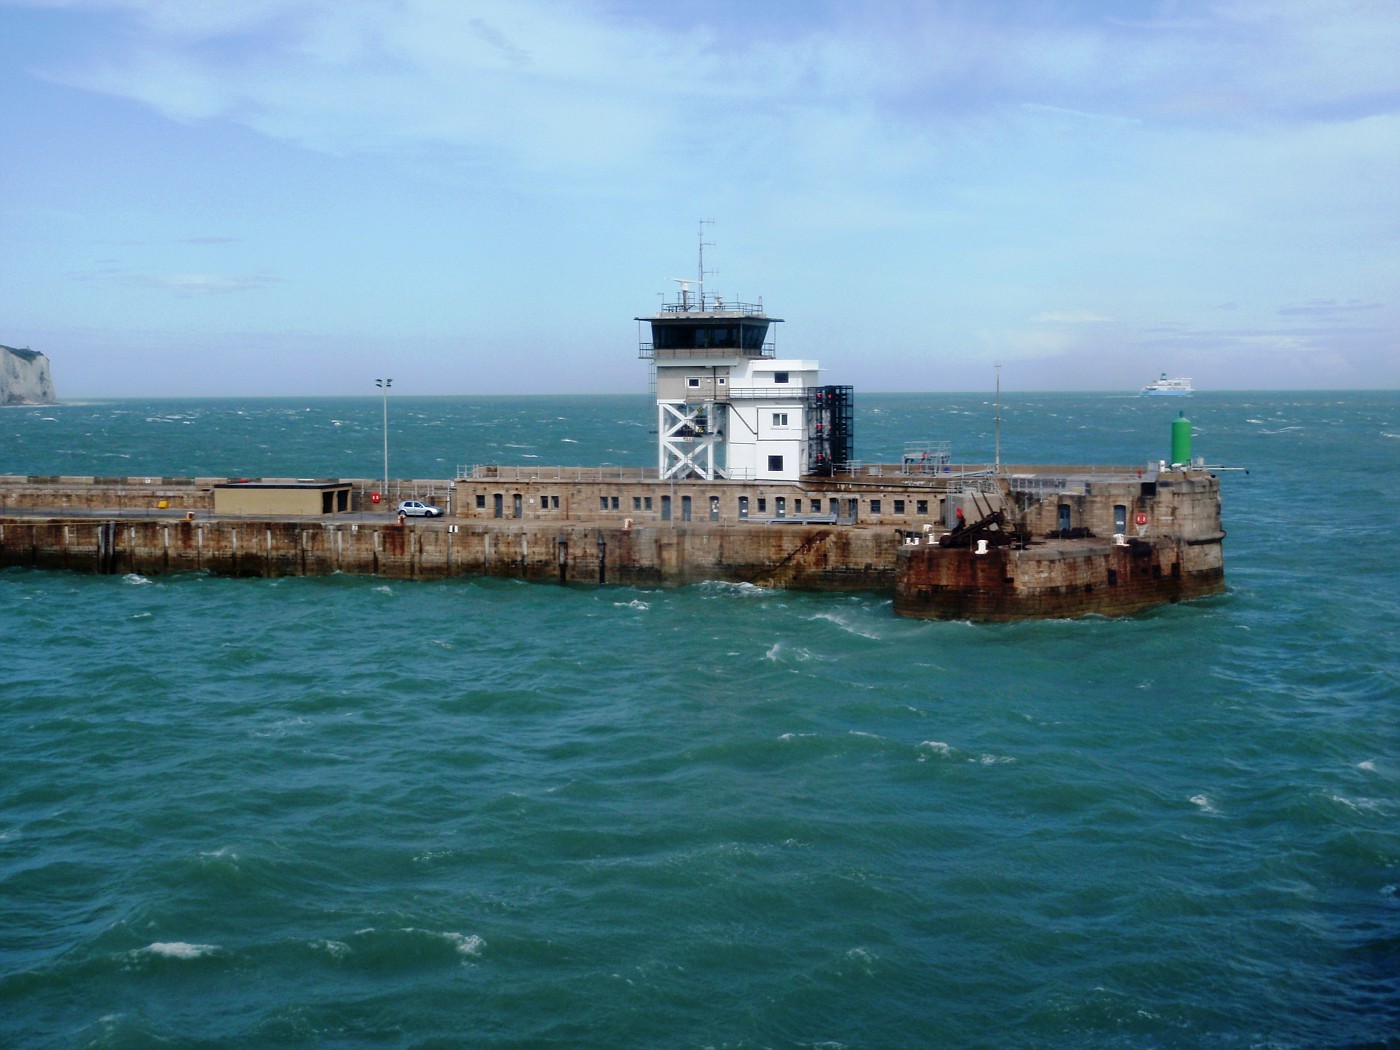 Harbour mole of Dover